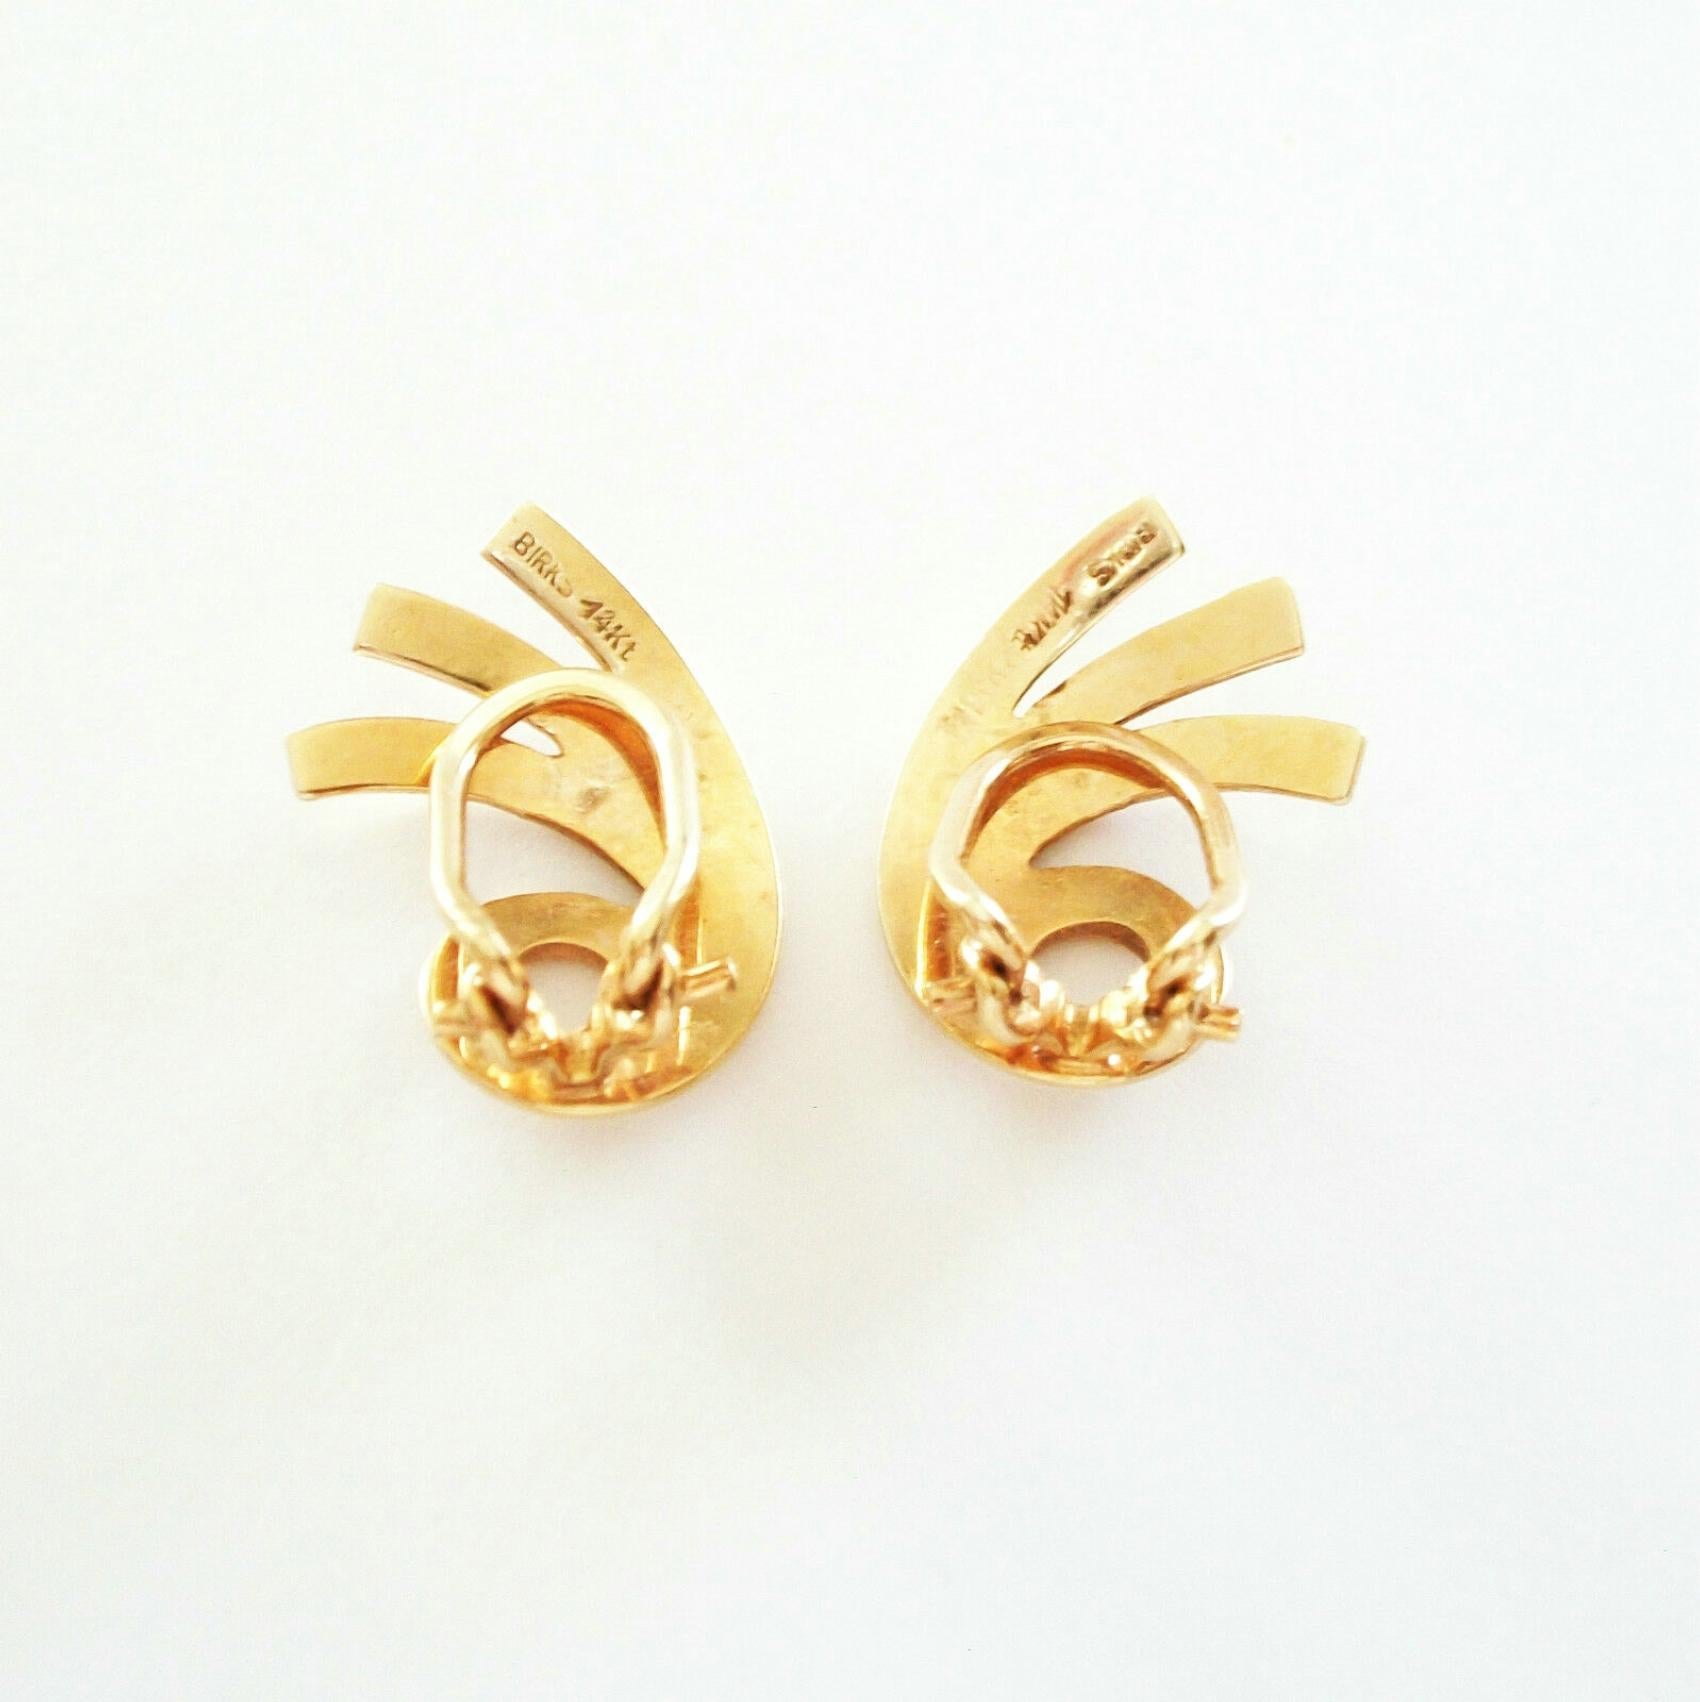 BIRKS - Vintage 14K Yellow Gold Nautilus Earrings - Canada - Mid 20th Century In Good Condition For Sale In Chatham, CA